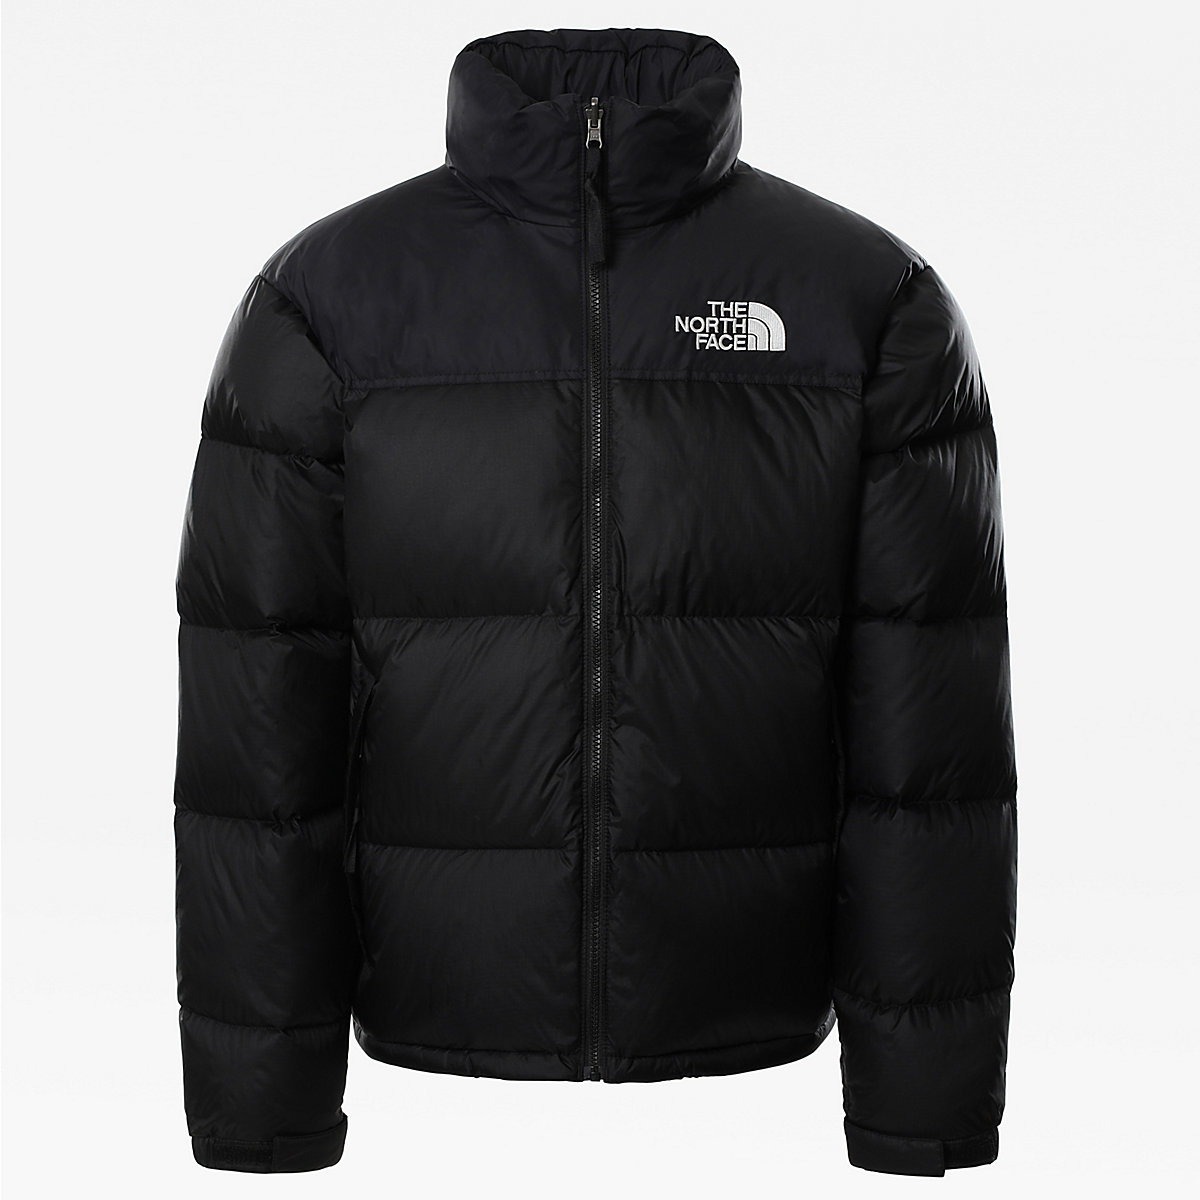 The Best Variants of The North Face Nuptse in 2023 - casual-closet